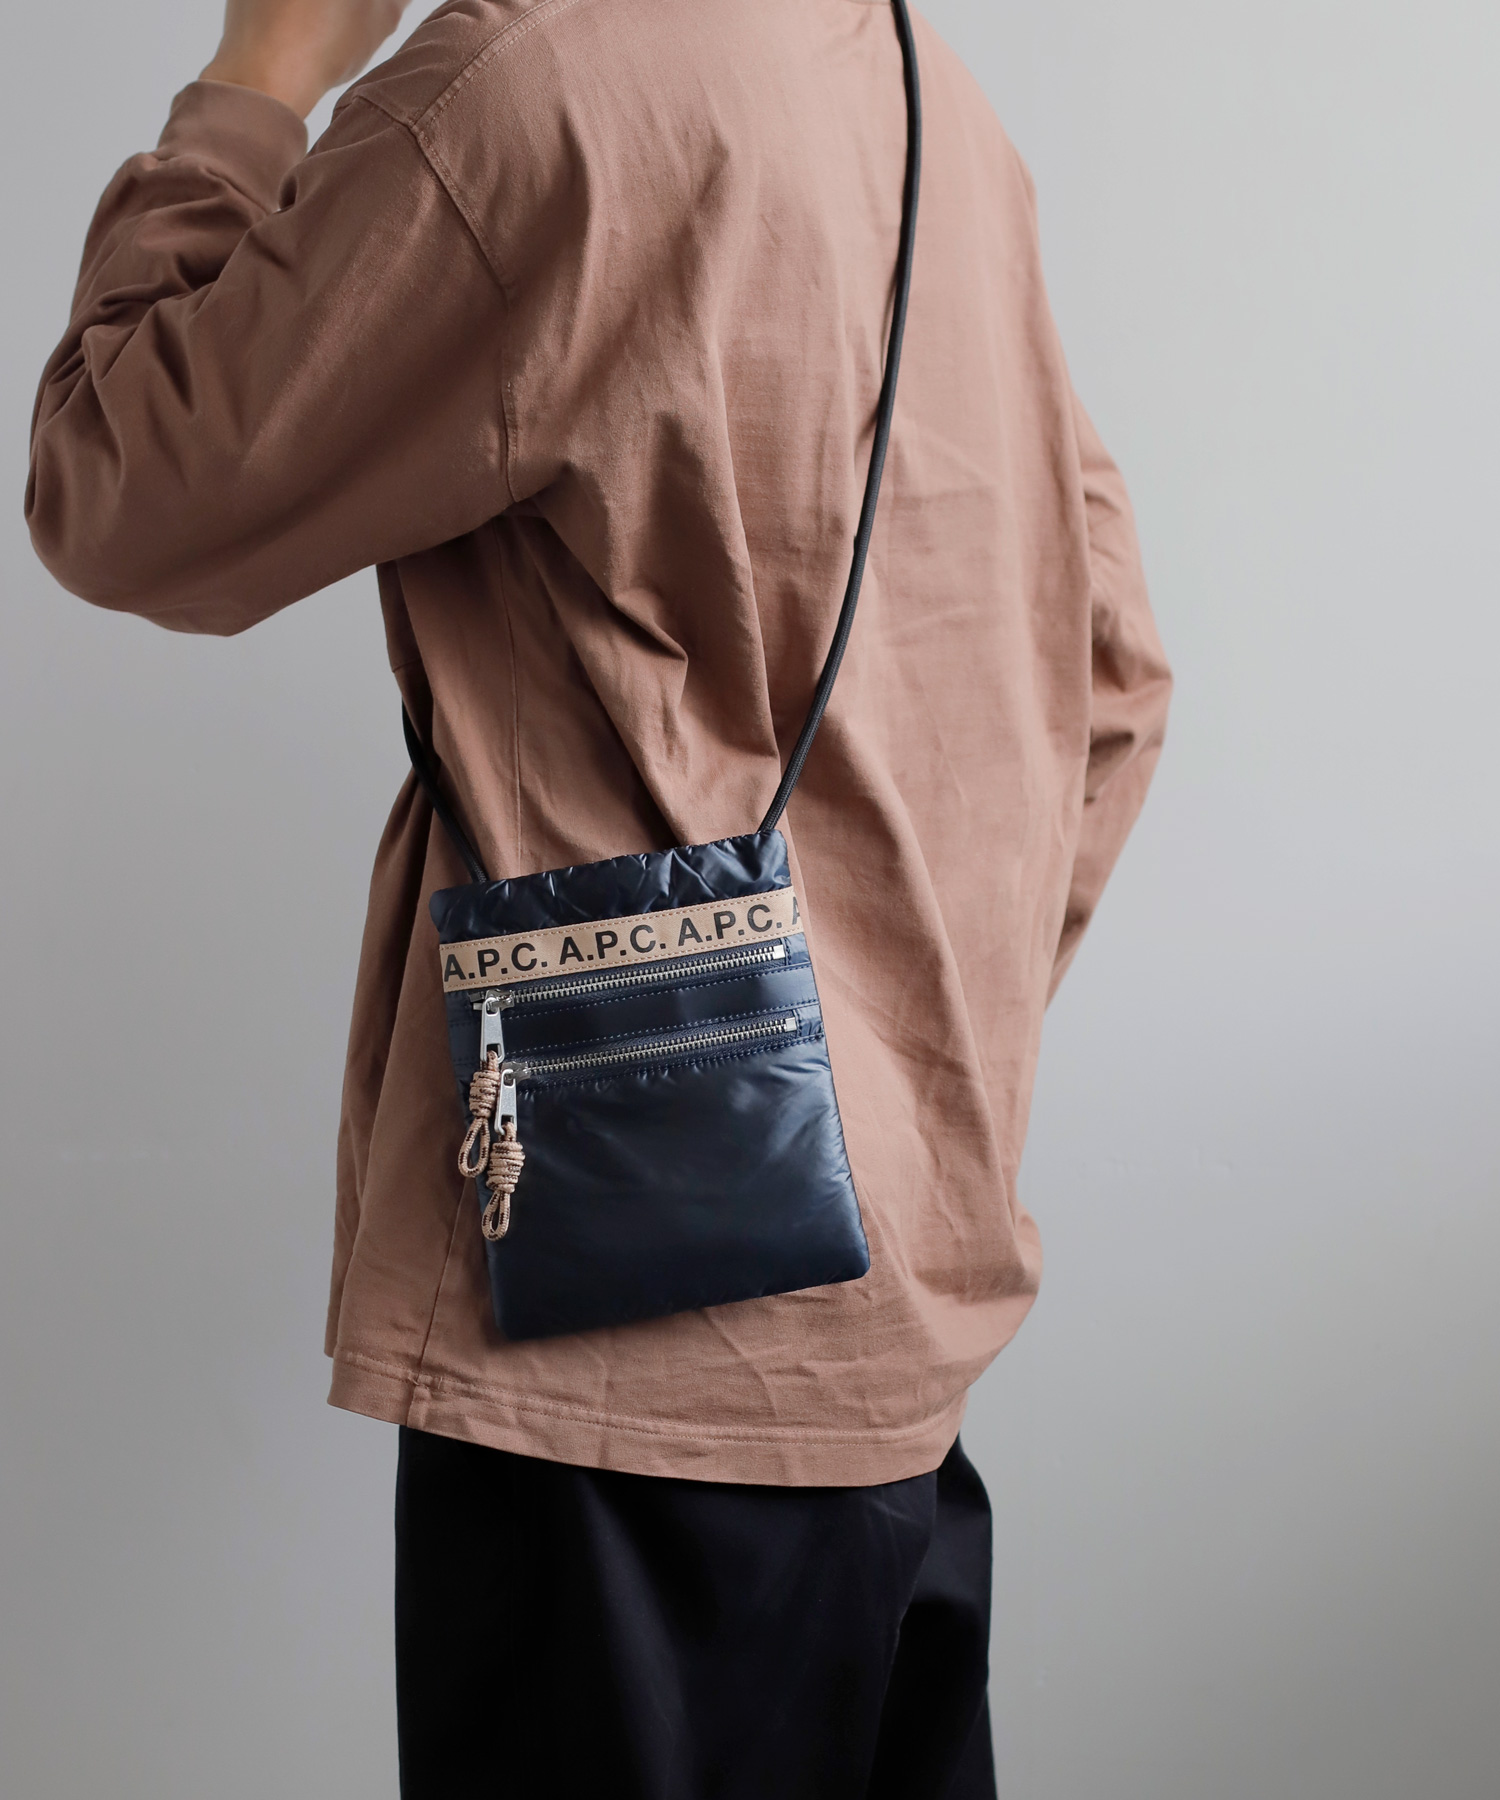 A.P.C NECK POUCH REPEAT ネックポーチバッグ